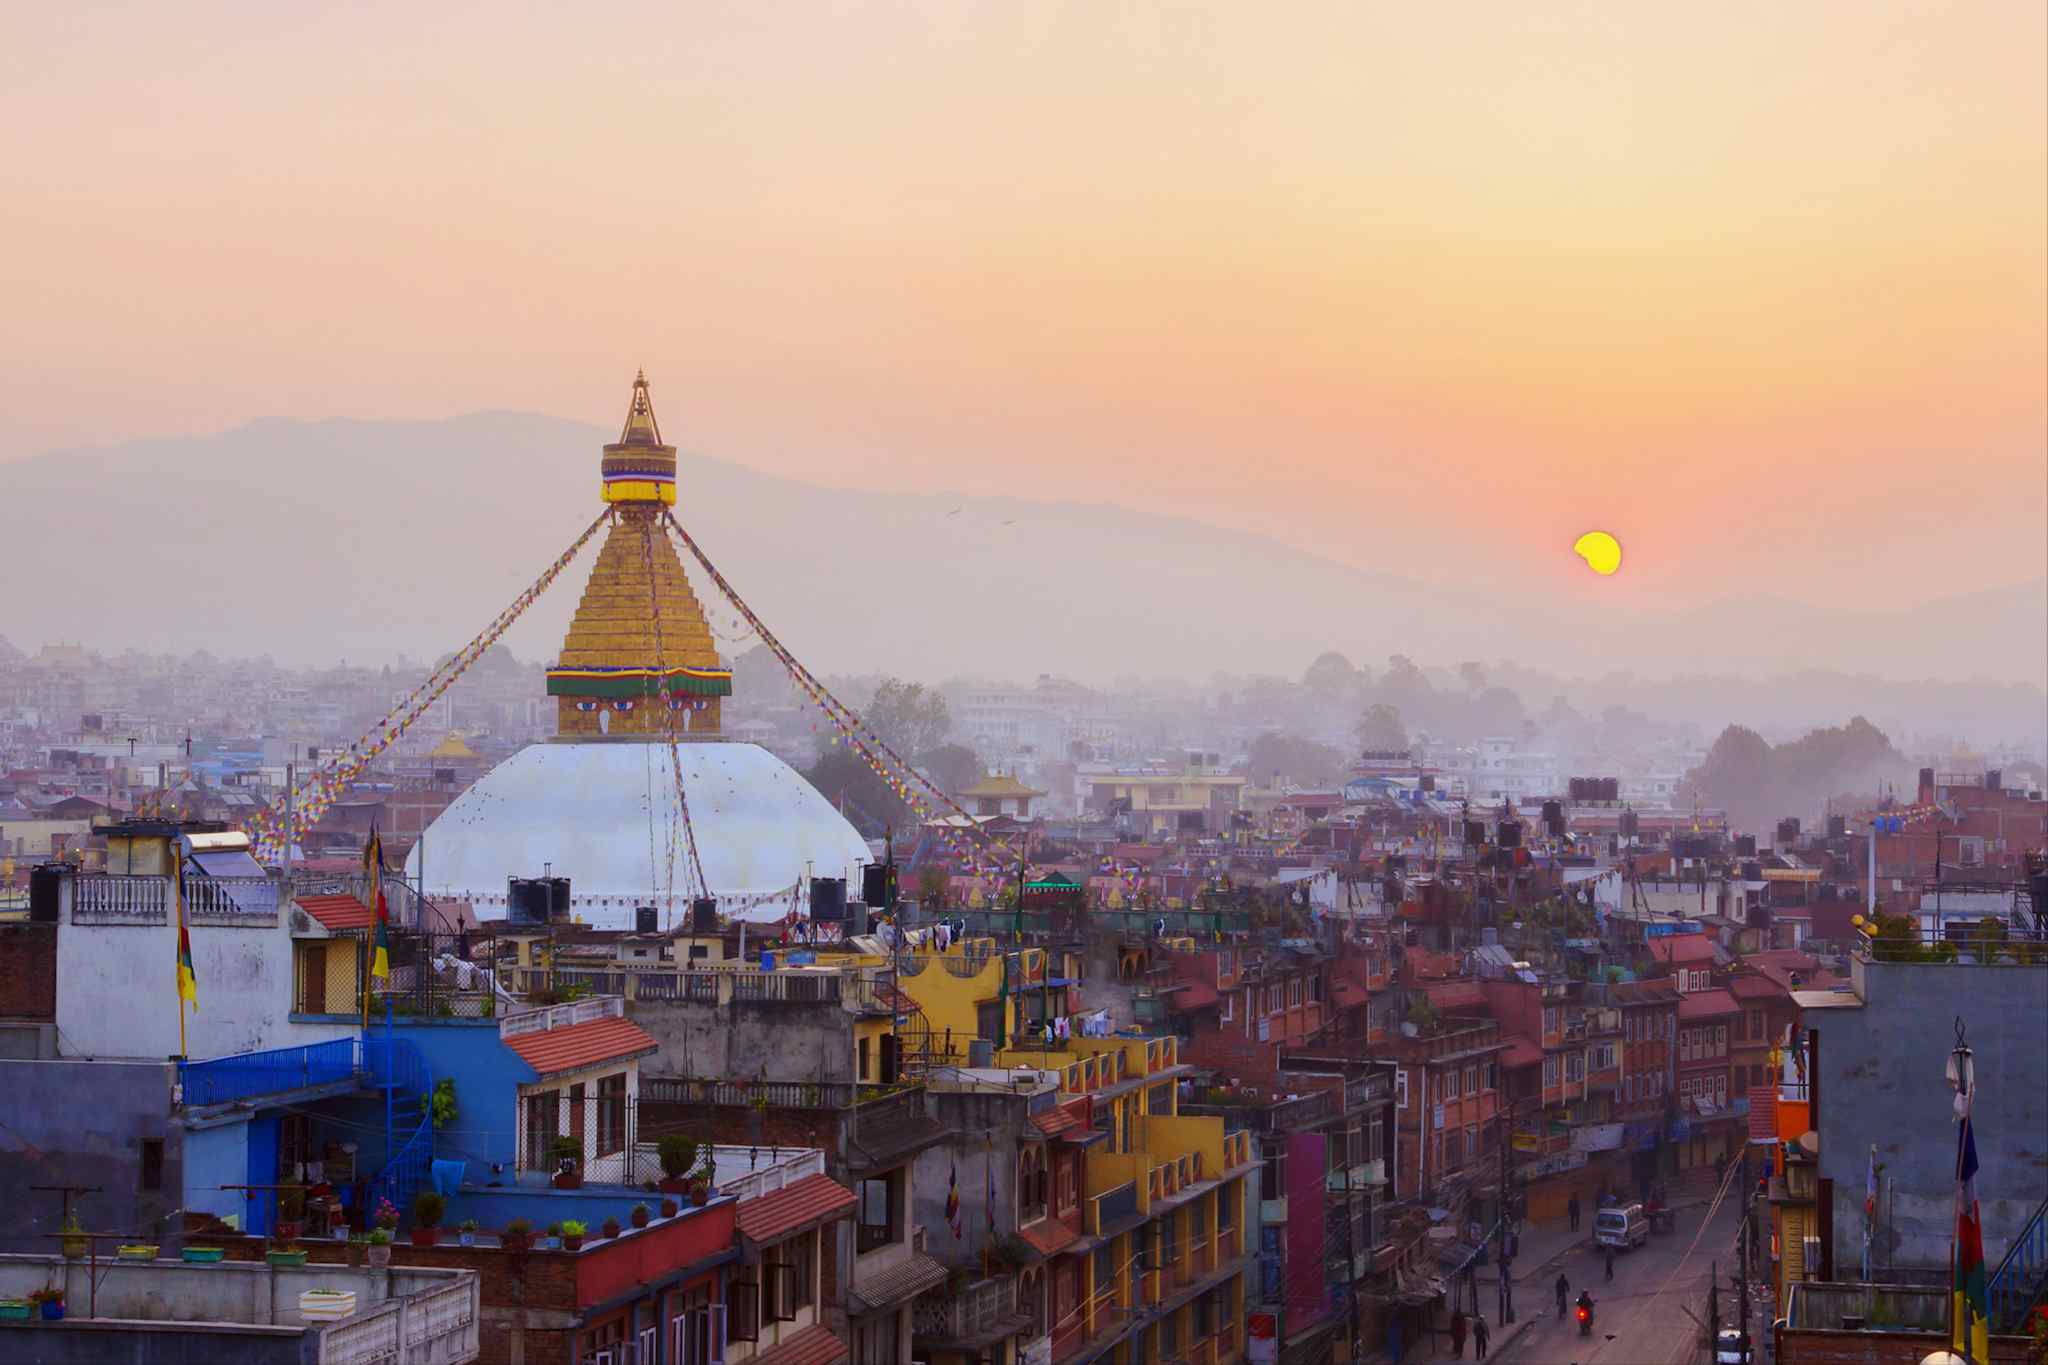 Aerial view of Kathmandu, Nepal at sunset with a stupa rising into the skyline.